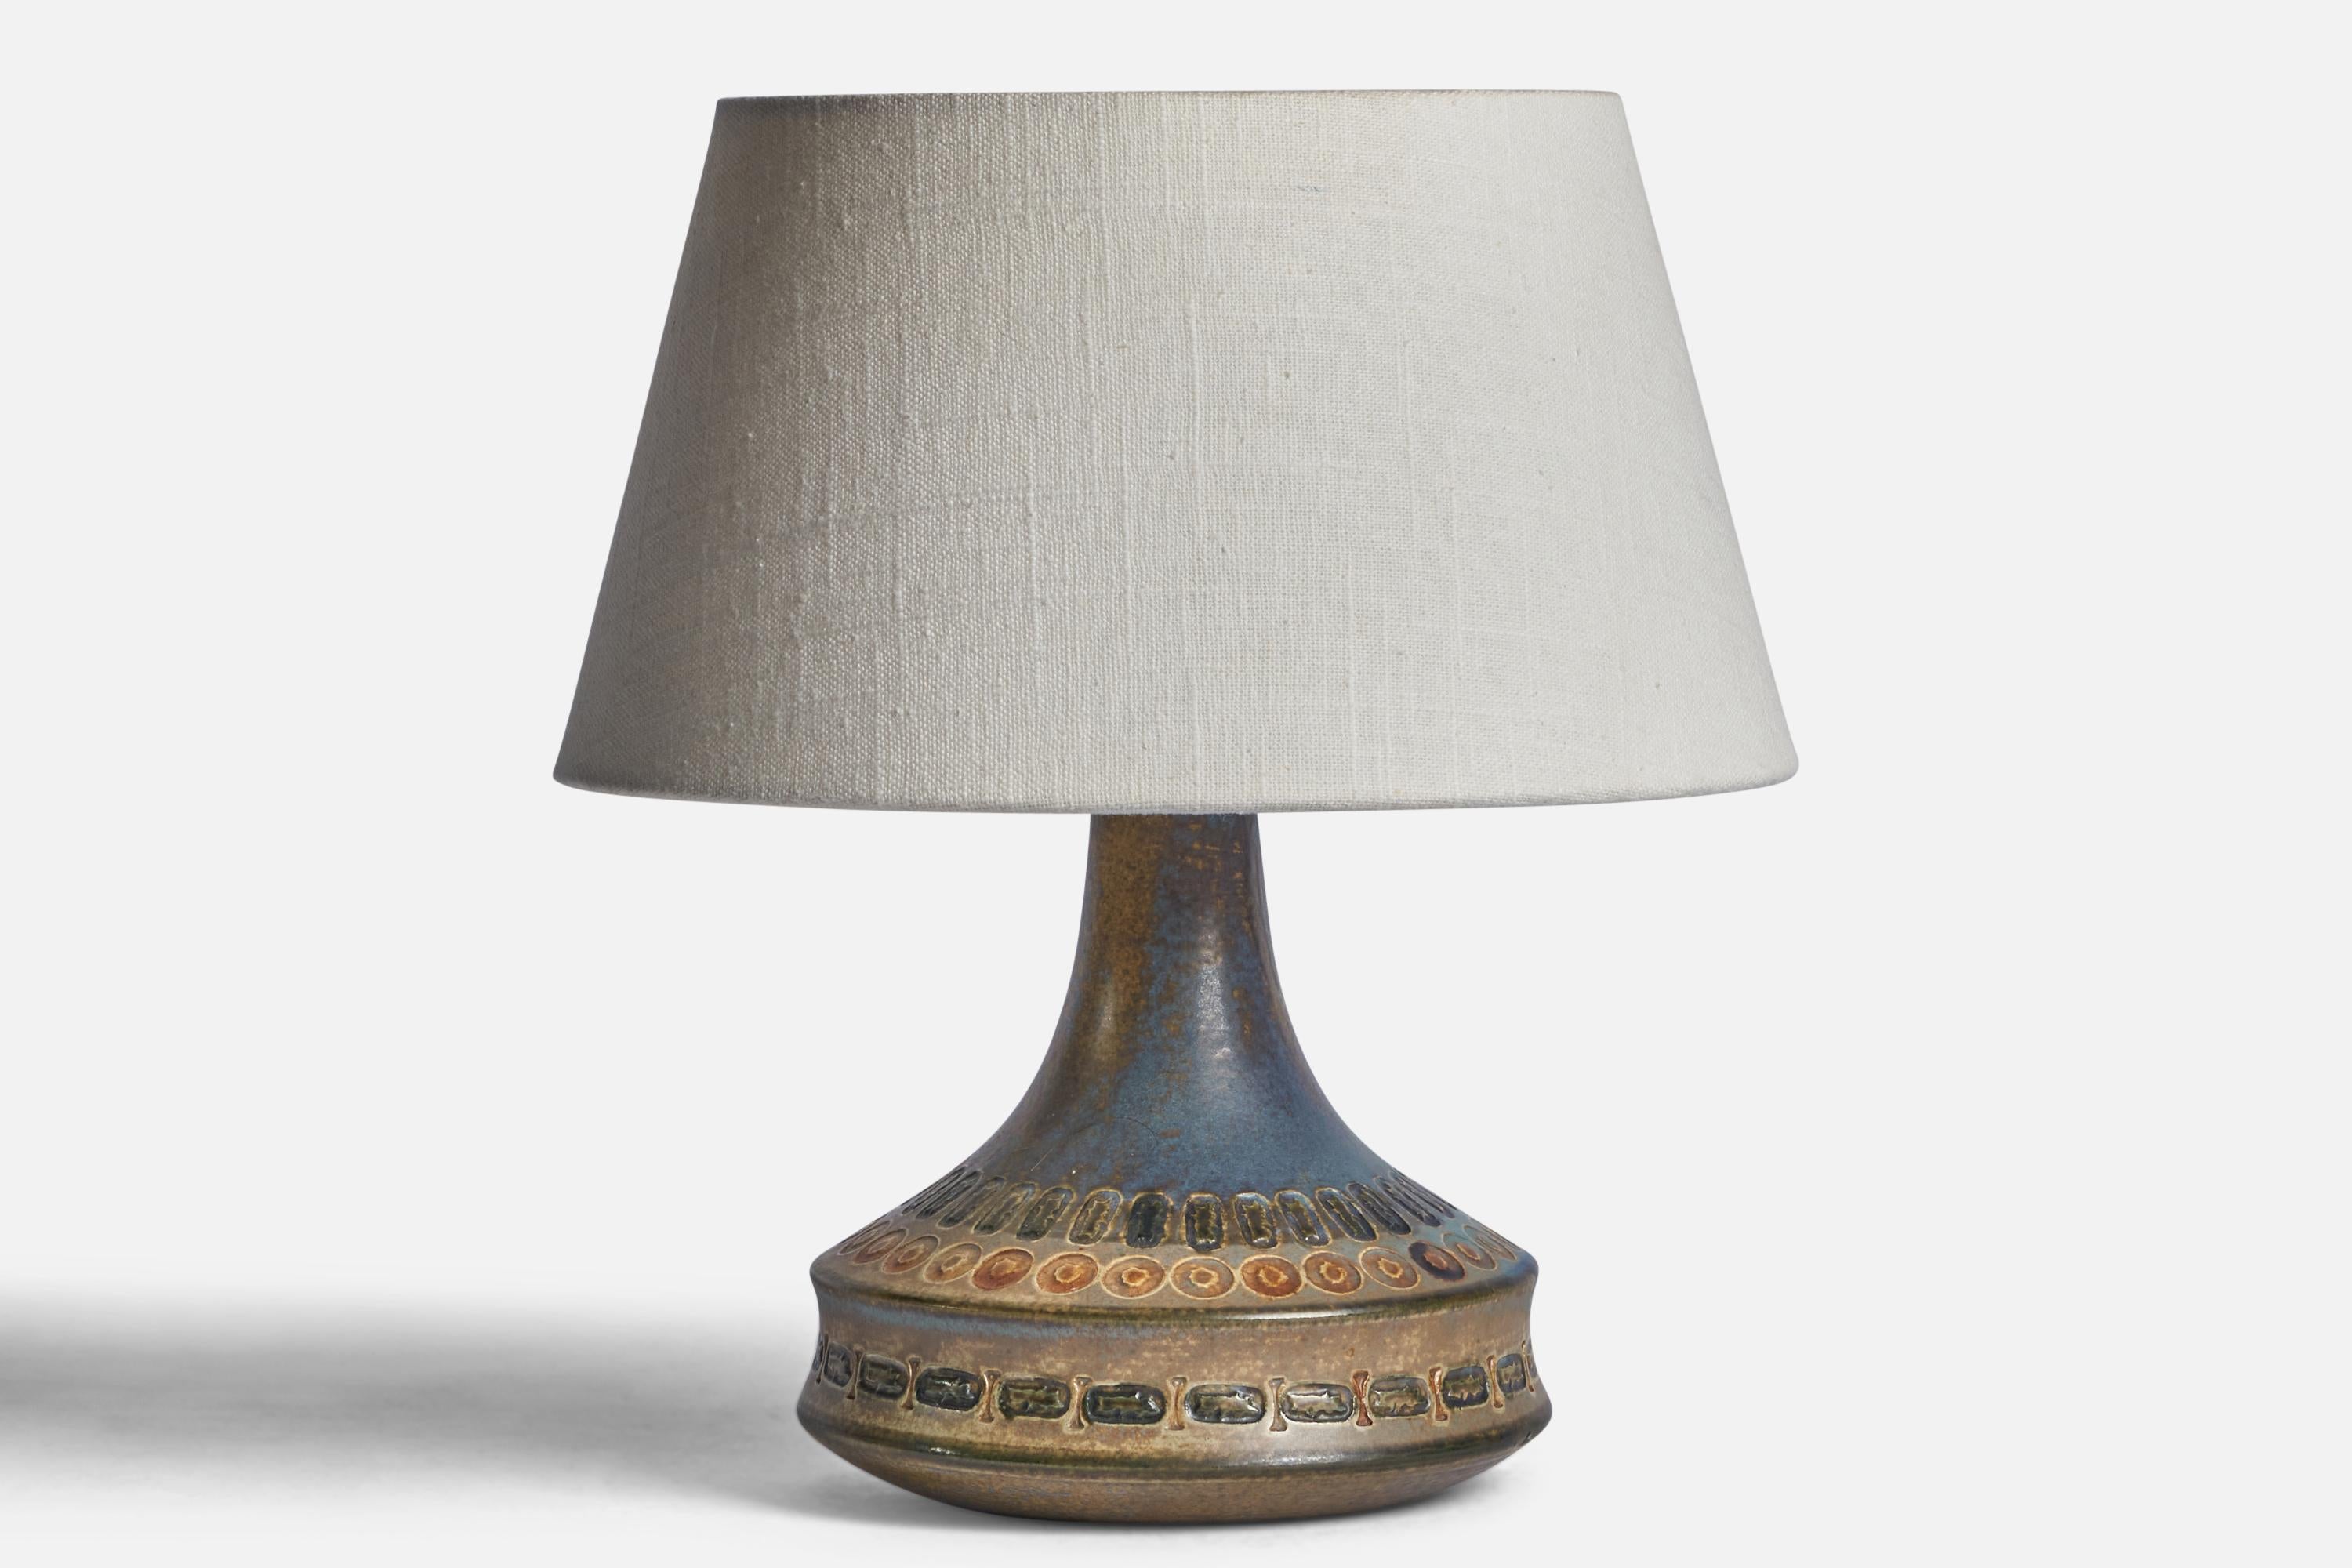 A blue and beige-glazed and incised table lamp designed by Ulla Winbladh and produced by Alingsås Keramik, Sweden, c. 1960s.

Dimensions of Lamp (inches): 8.25” H x 6.15” Diameter

Dimensions of Shade (inches): 7” Top Diameter x 10” Bottom Diameter